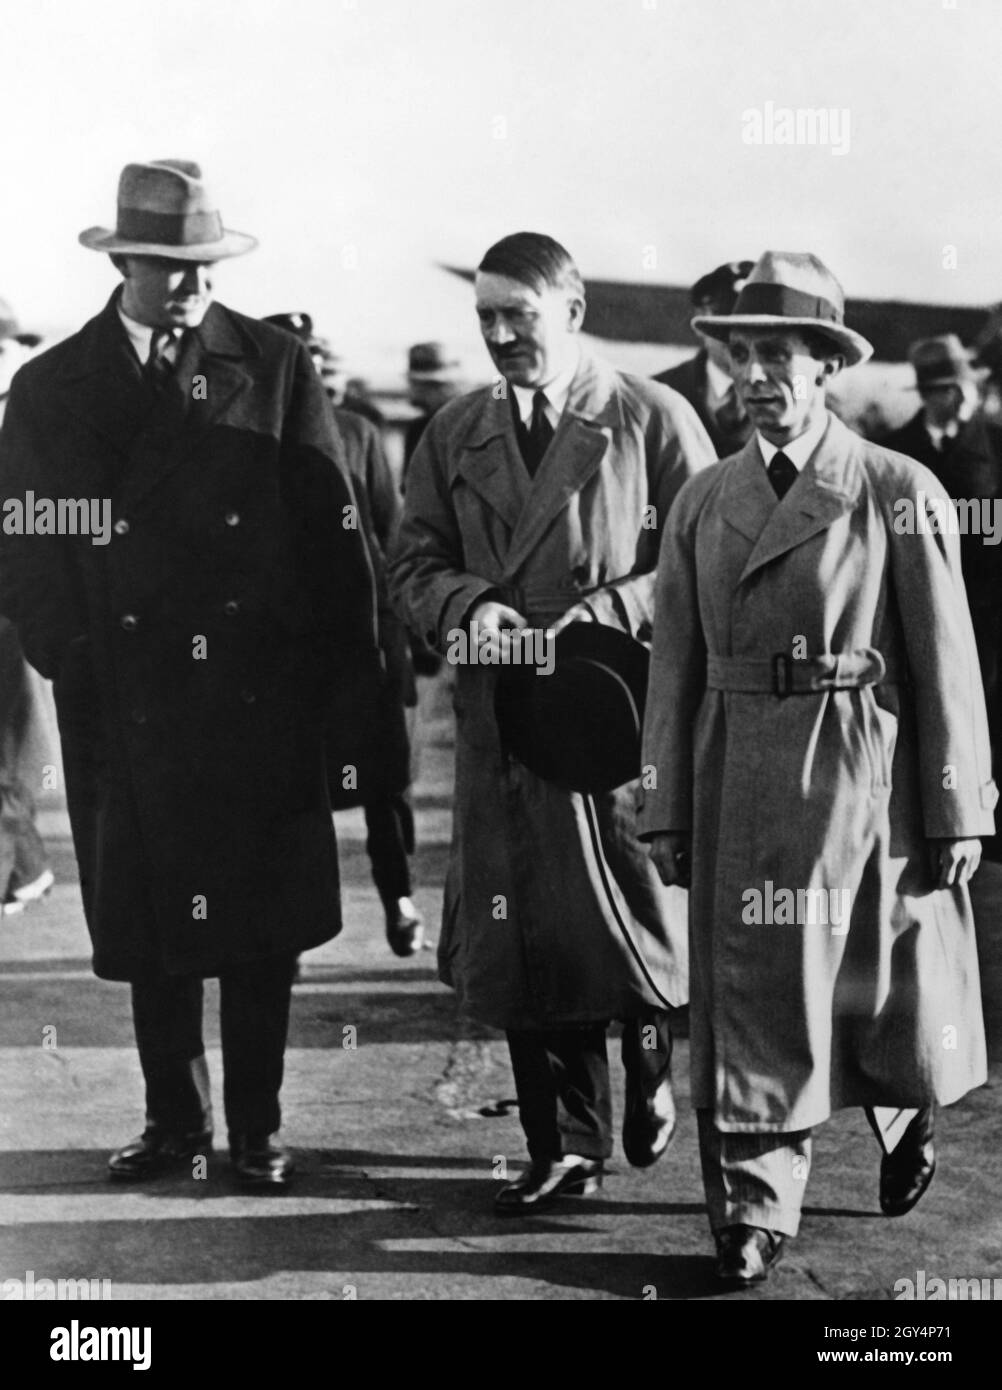 Adolf Hitler arrives in Berlin with Wilhelm Brückner at Tempelhof Airport and is received by the Gauleiter of Berlin, Joseph Goebbels. Hitler took to Berlin on an election campaign matter and at the invitation of Reich President von Hindenburg, who wanted to negotiate the formation of a new Reich government with the participation of the NSDAP. [automated translation] Stock Photo